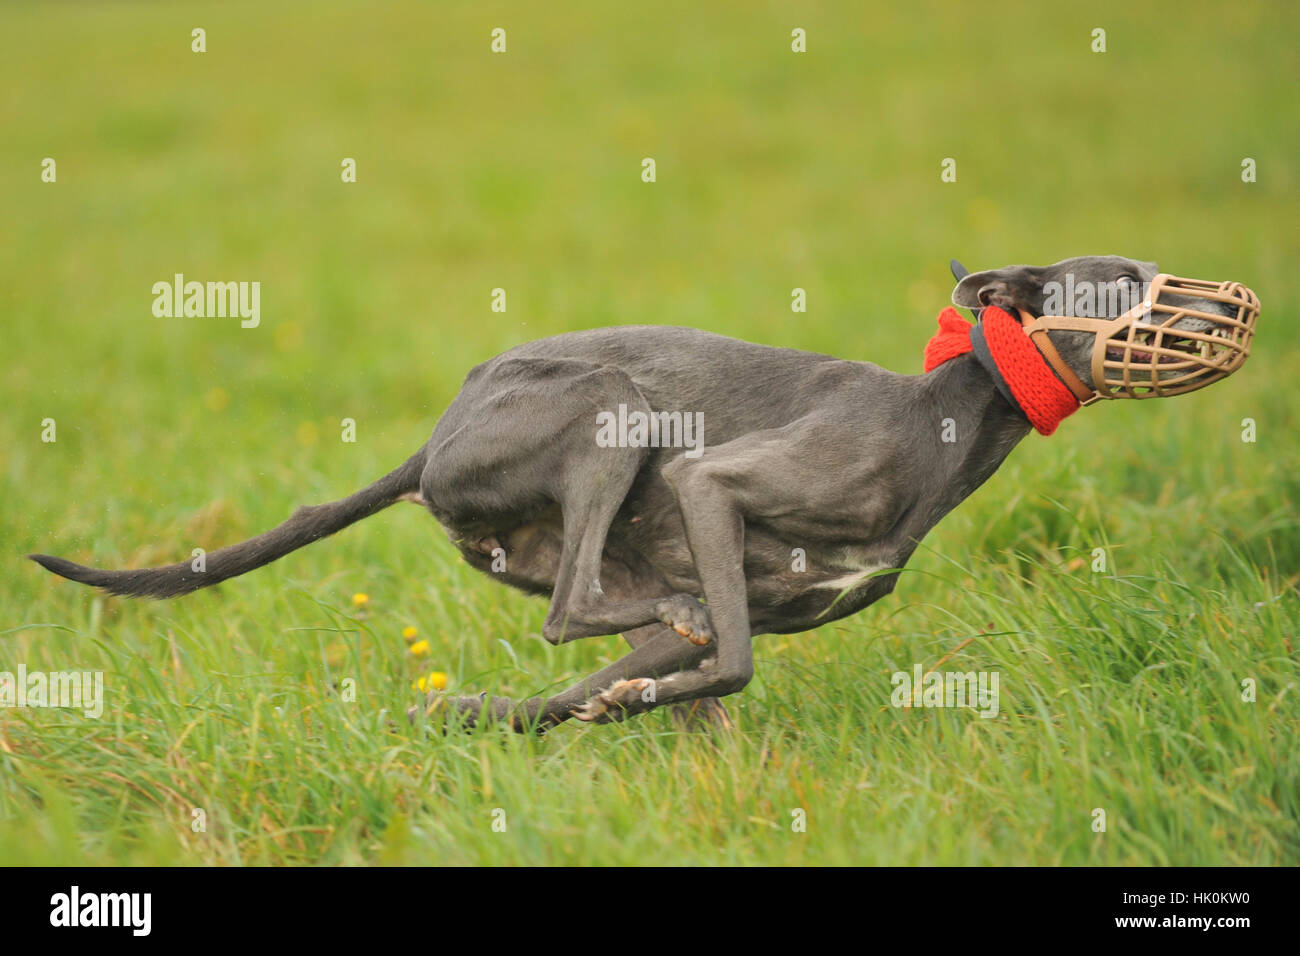 greyhounds lure coursing Stock Photo